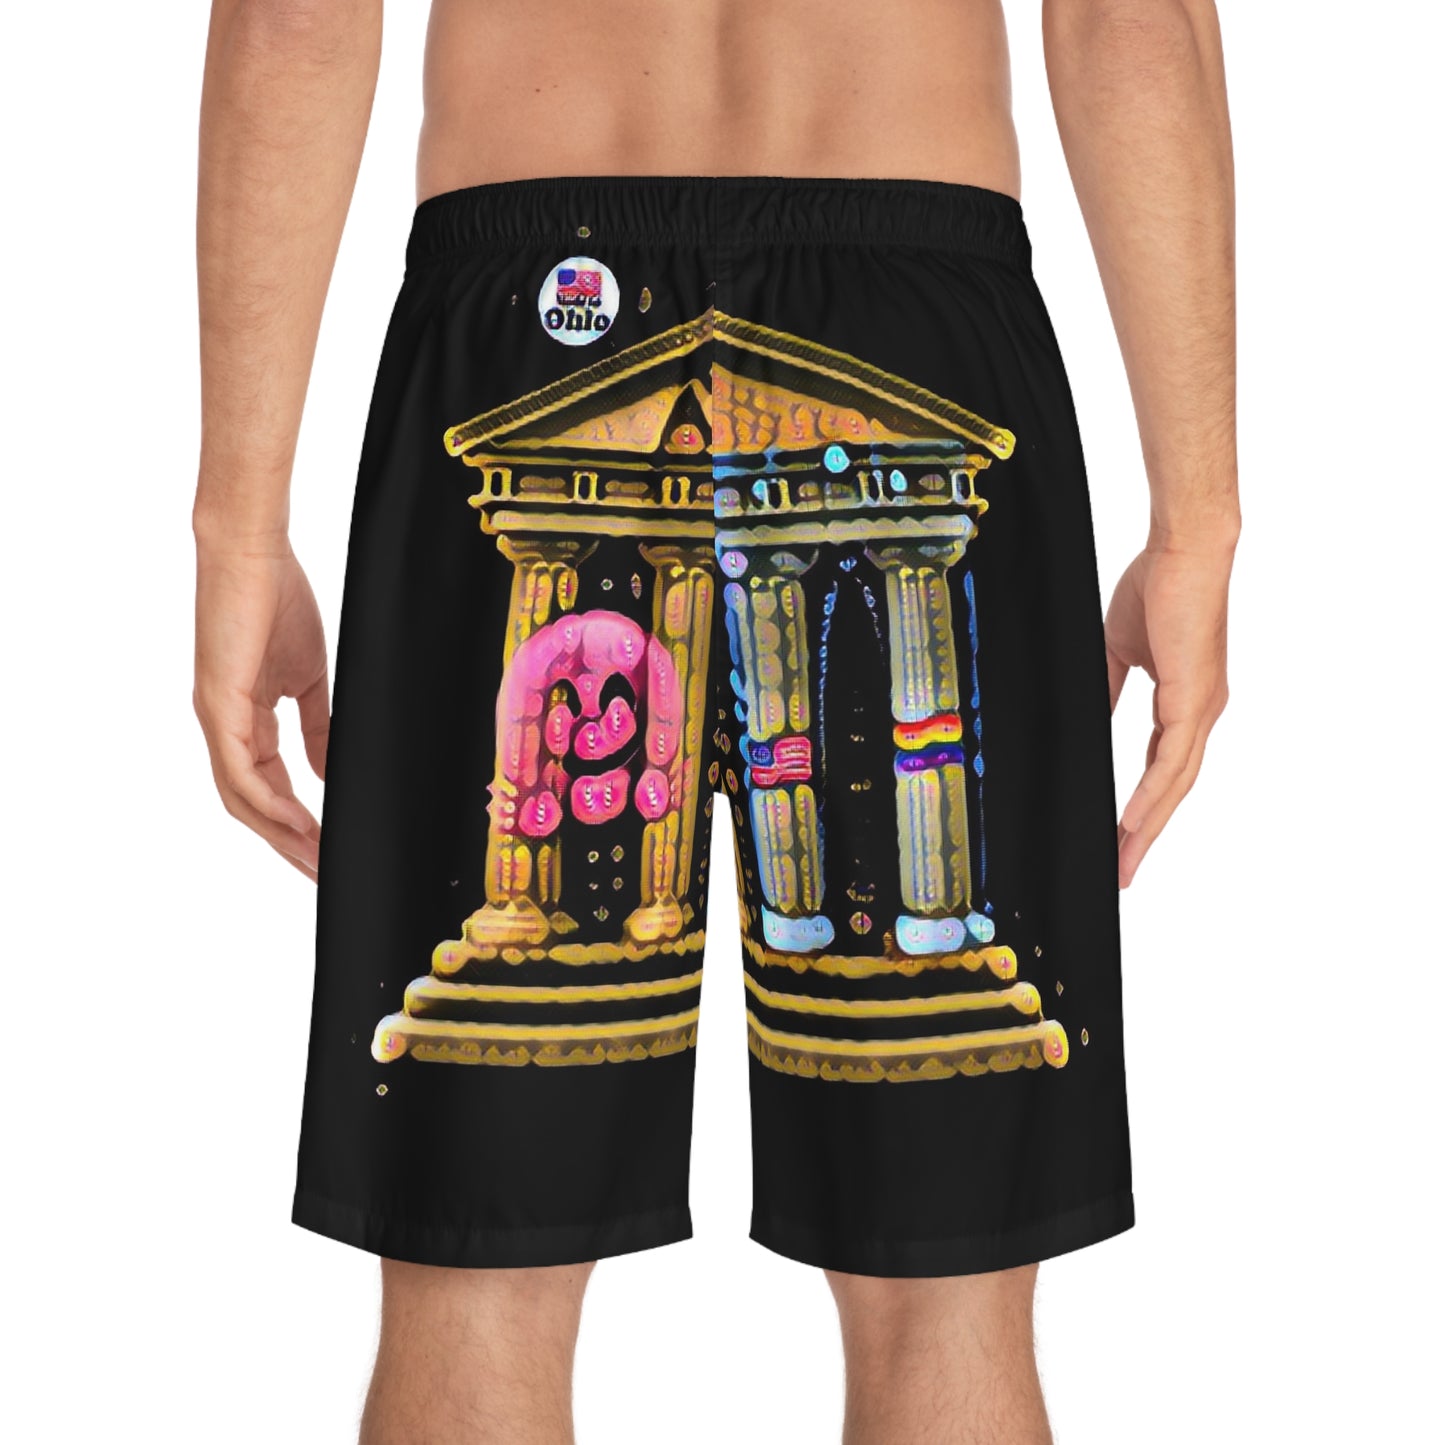 Temple of Fashion Temple of Tickle Britches Men's Board Shorts (AOP)